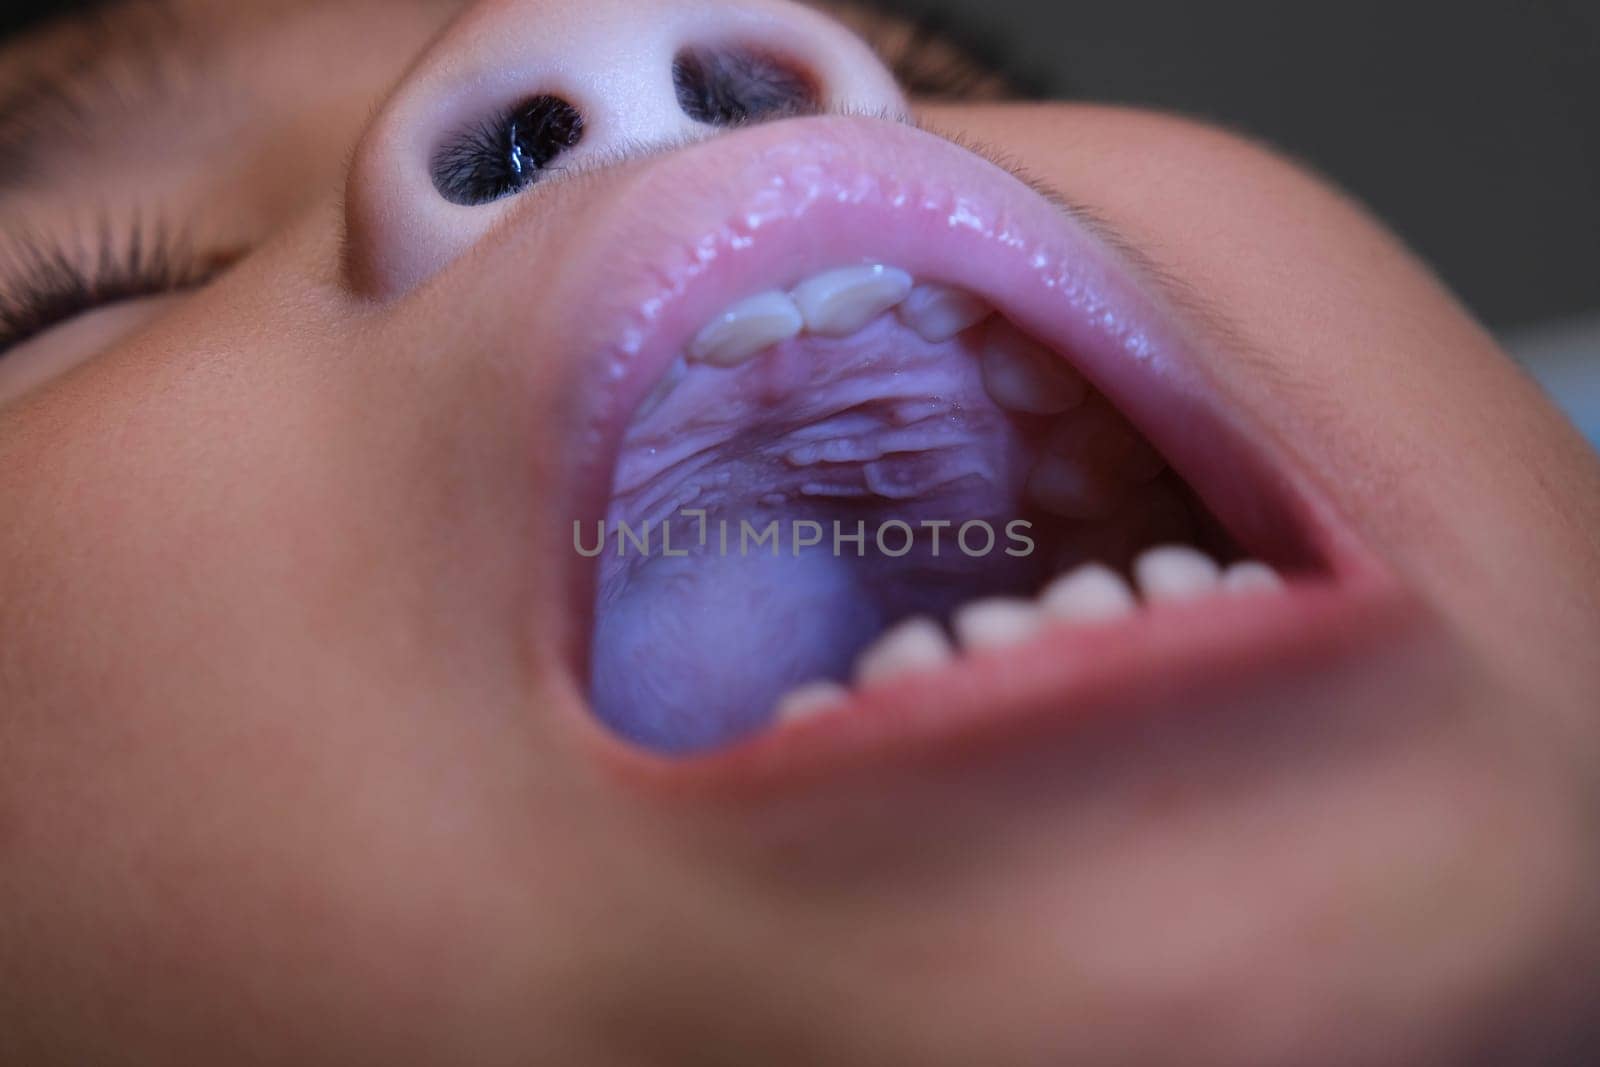 Close-up inside the oral cavity of a healthy child with beautiful rows of baby teeth. Young girl opens mouth revealing upper and lower teeth, hard palate, soft palate, dental and oral health checkup.